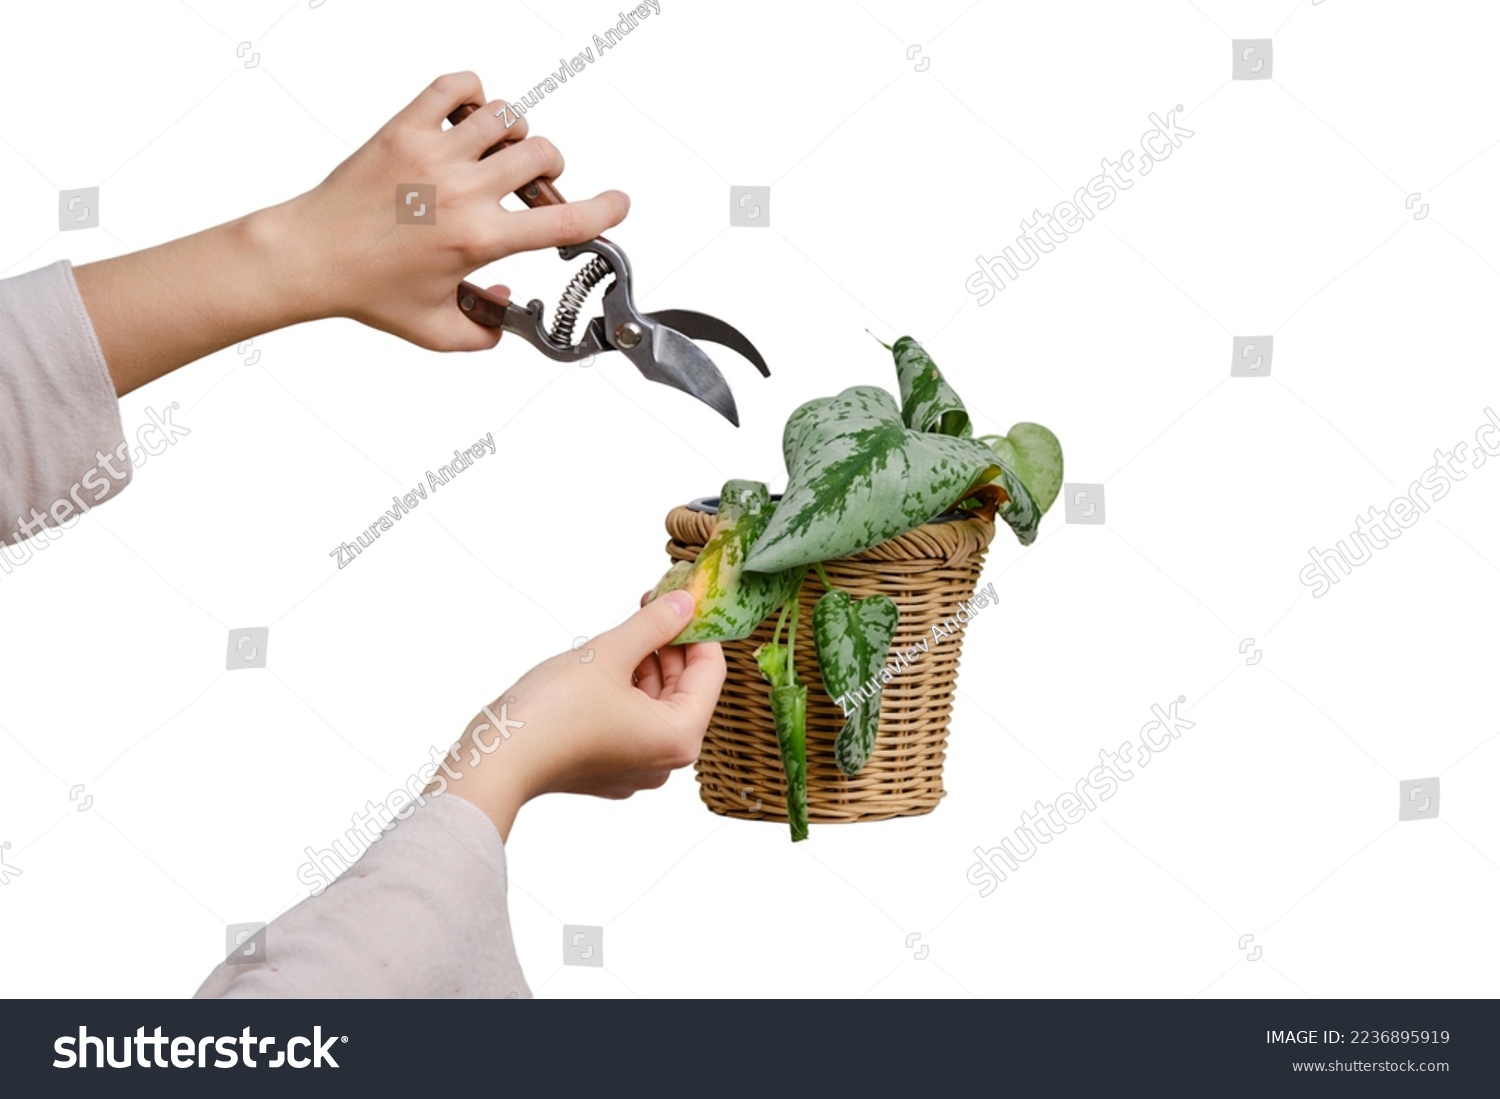 Woman gardener cuts wilted plants in a pot with garden scissors, isolated on a white background. Female hand with pruning shears trim a dried flower. Scindapsus pictus trebie or silver vine #2236895919